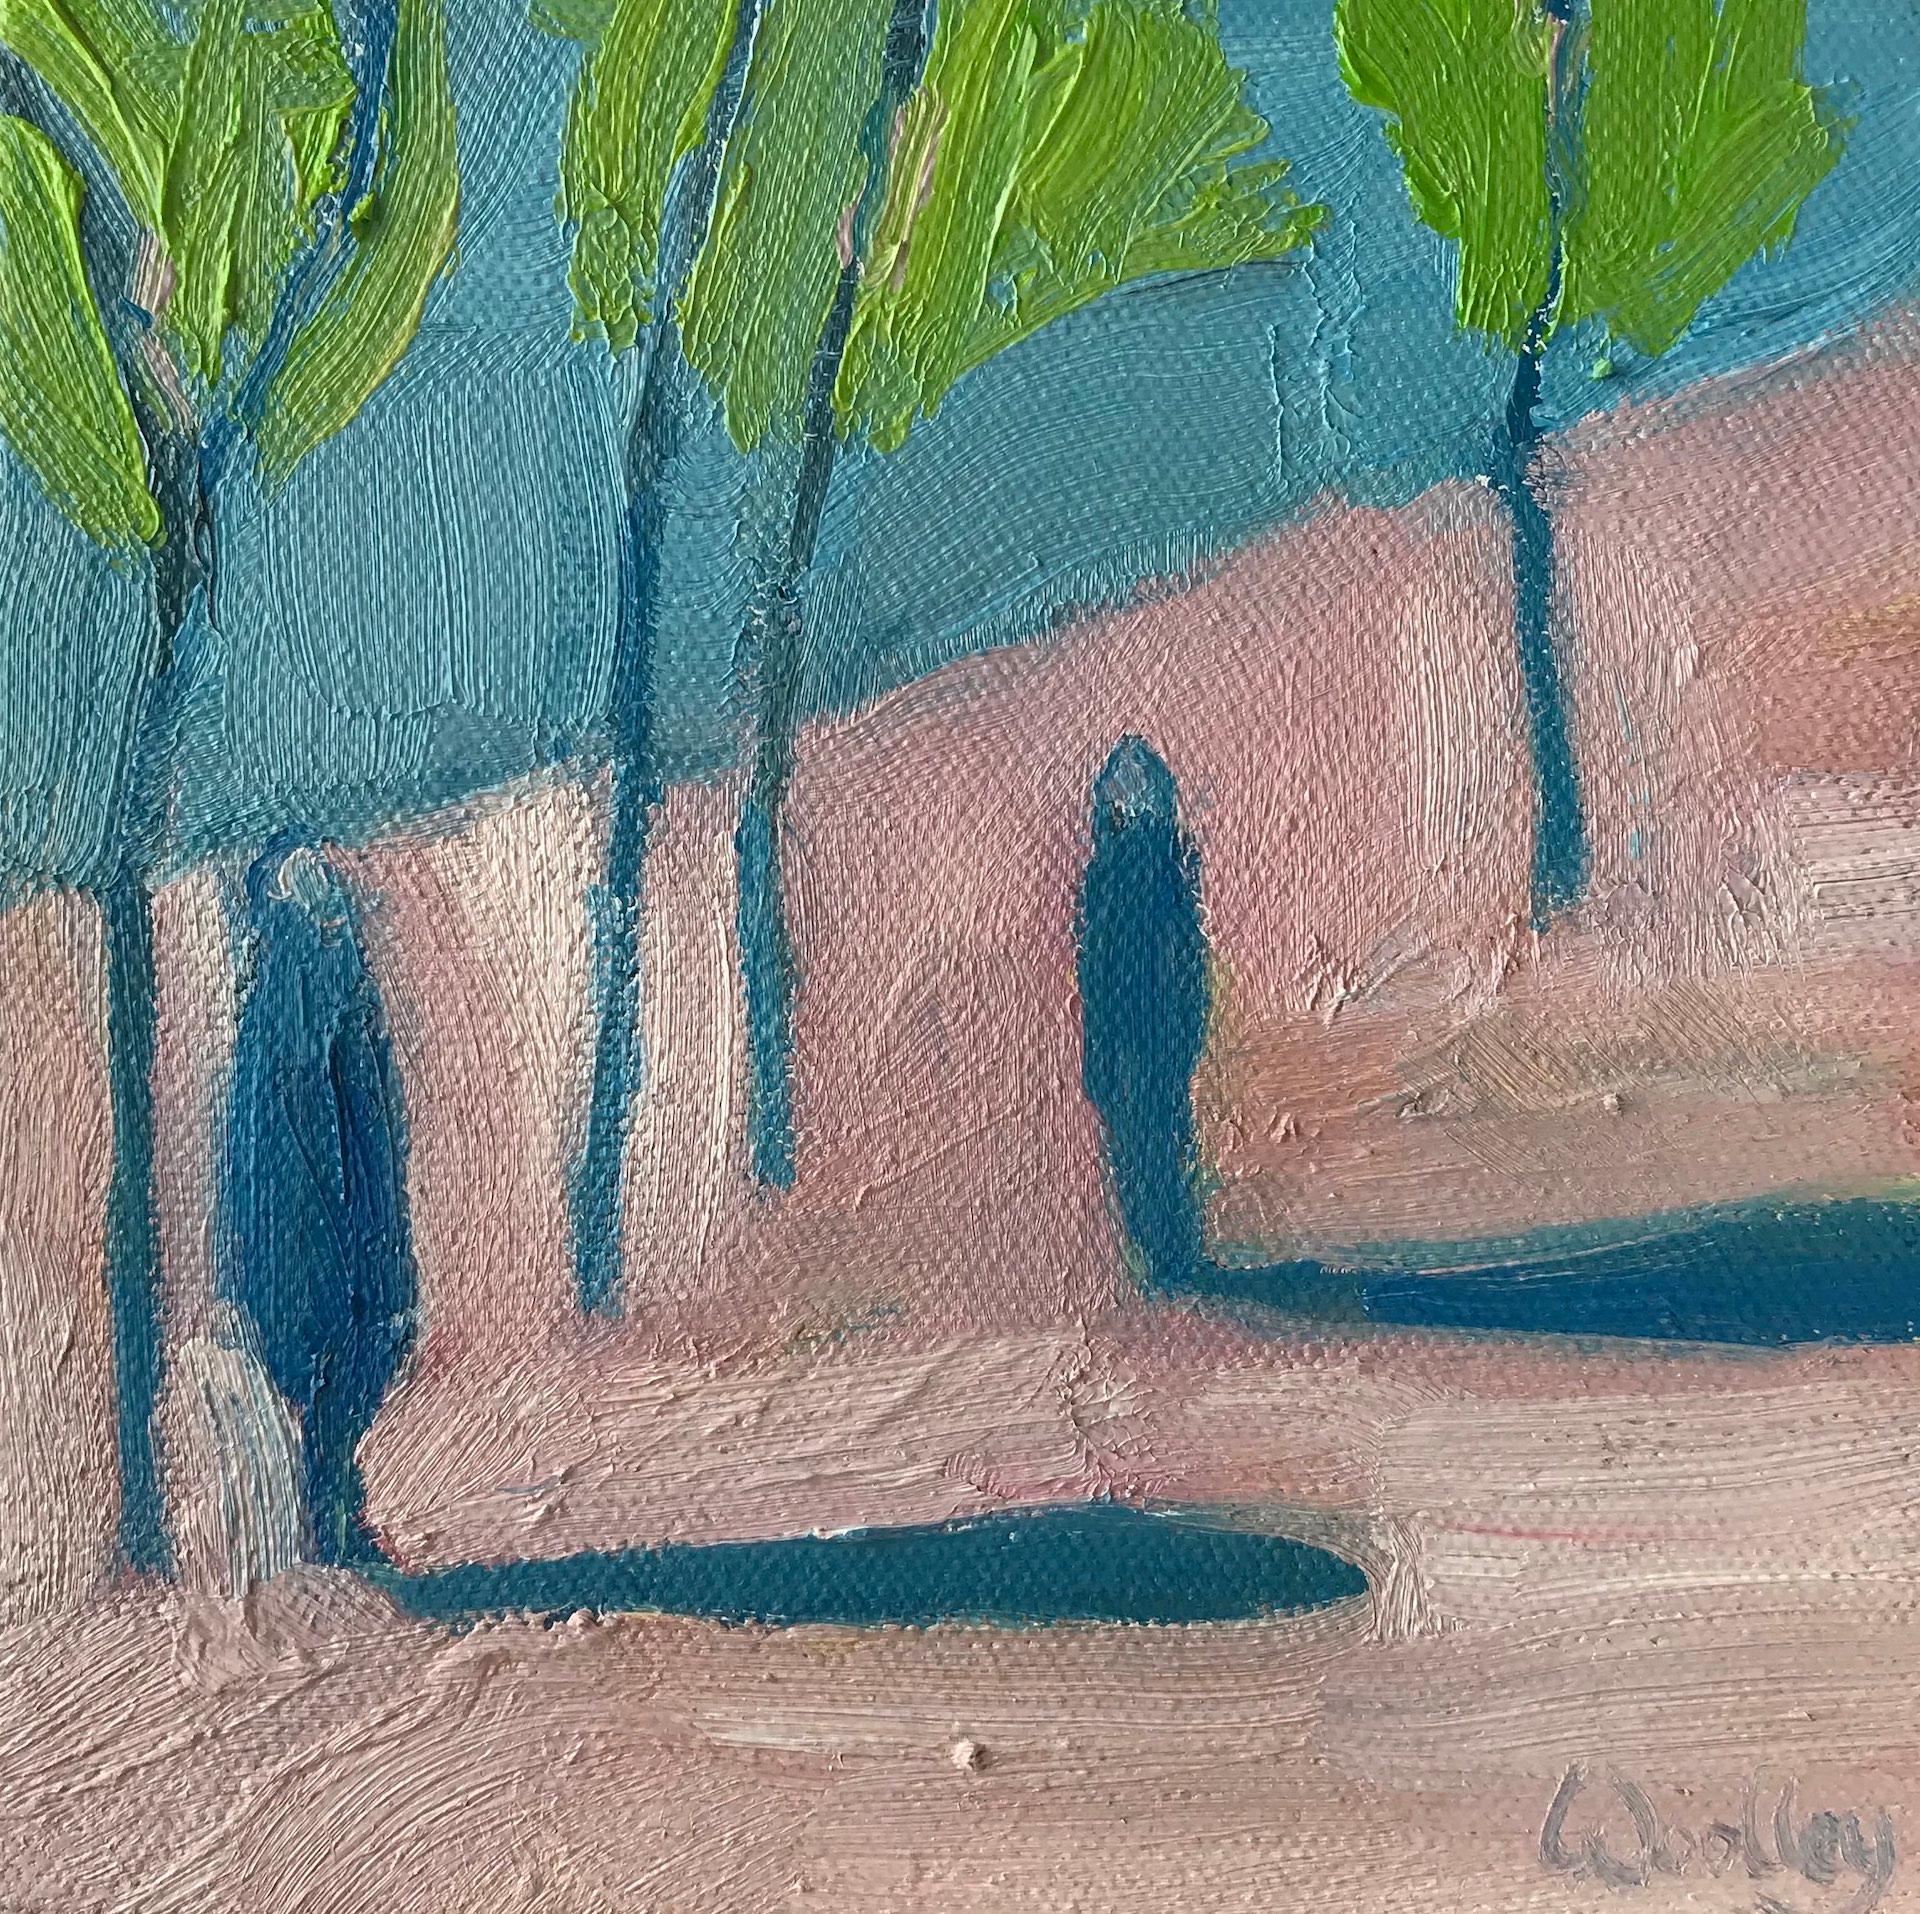 Eleanor Woolley
Winter Shadows 11
Original Landscape Painting
Oil Paint on Canvas
Canvas Size: H 15cm x W 15cm x D 4cm
Sold Unframed
Ready to Hang
Please note that insitu images are purely an indication of how a piece may look.

Winter shadows 11 is